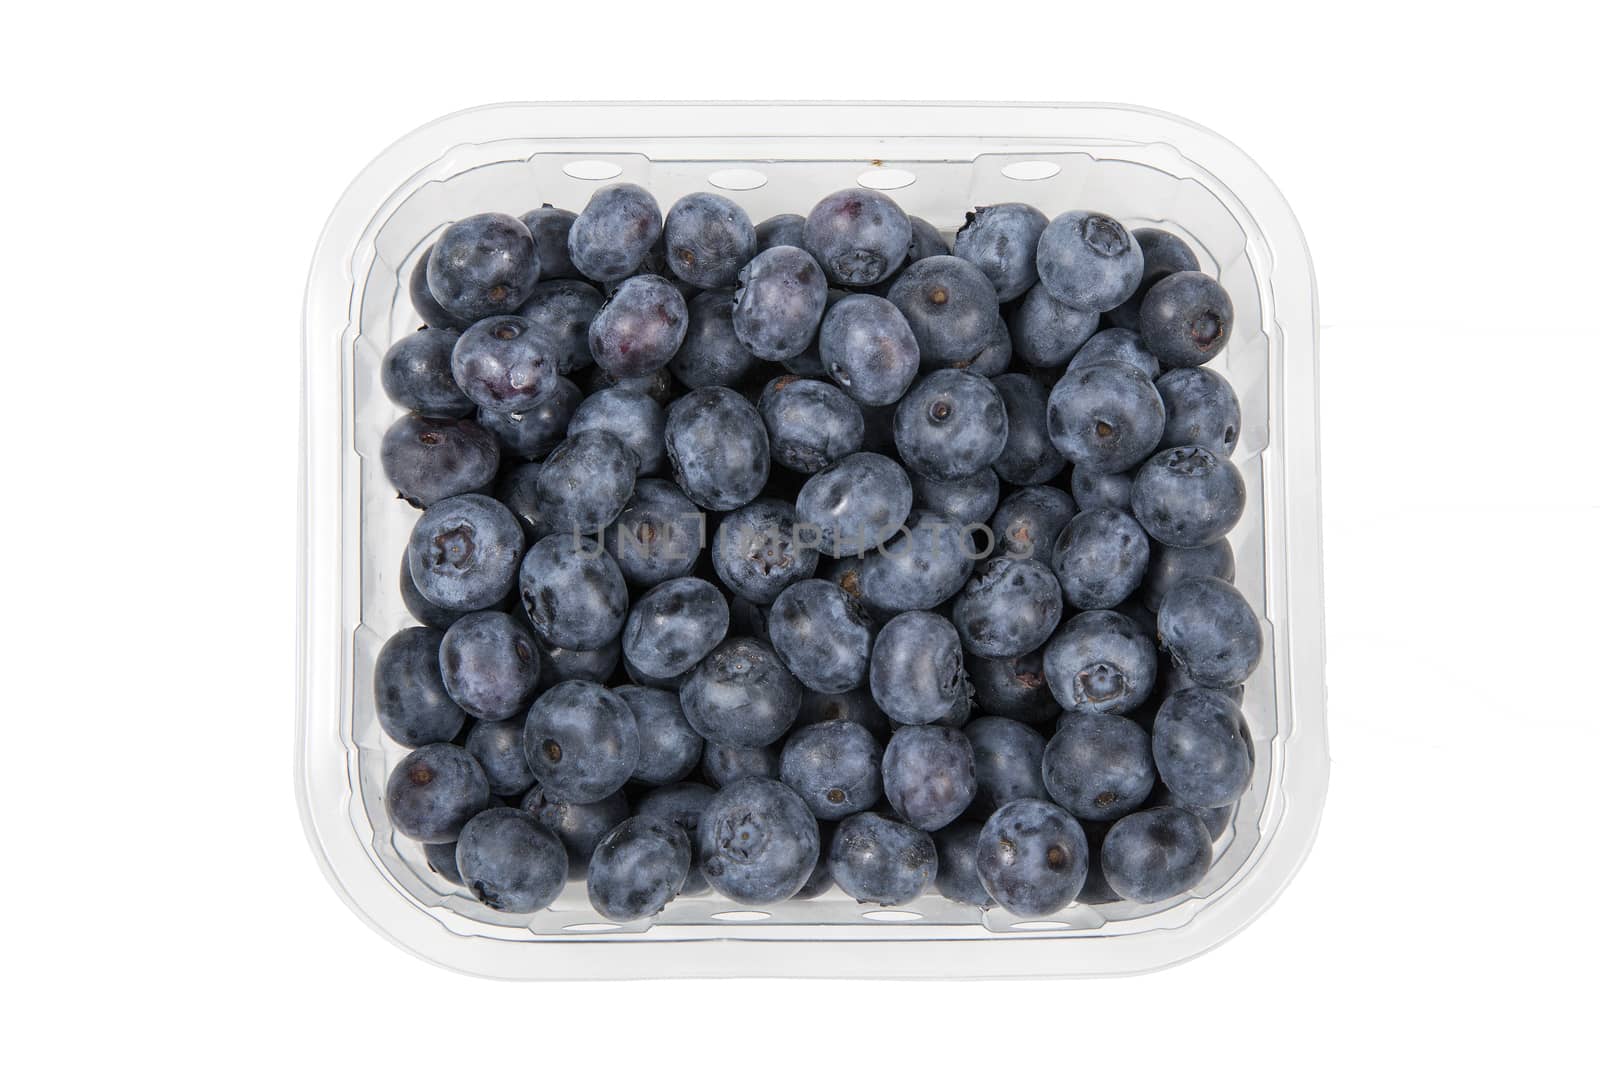 Blueberries image in a plastic container which have many food nutrition health benefits cut out and isolated on a white background